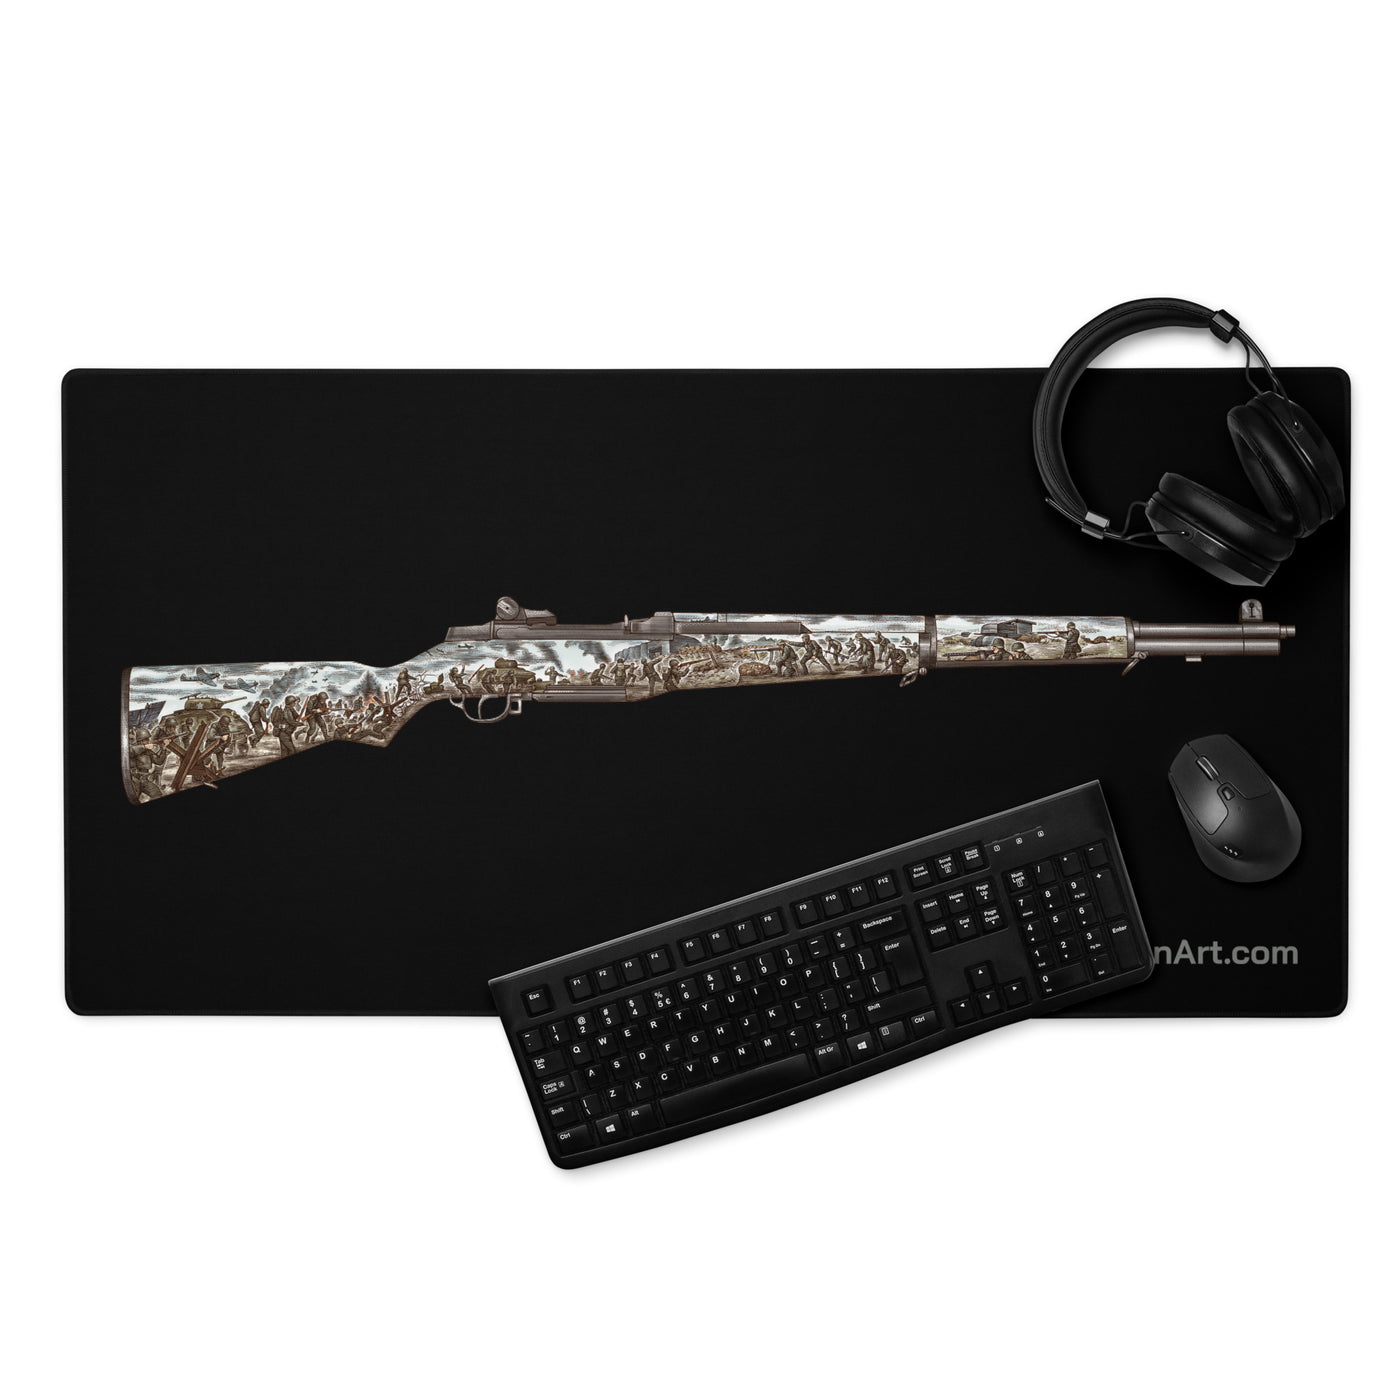 Honoring The Brave / M1 Garand / World War II D-Day Gaming Mouse Pad - Colored Gun - Black Background